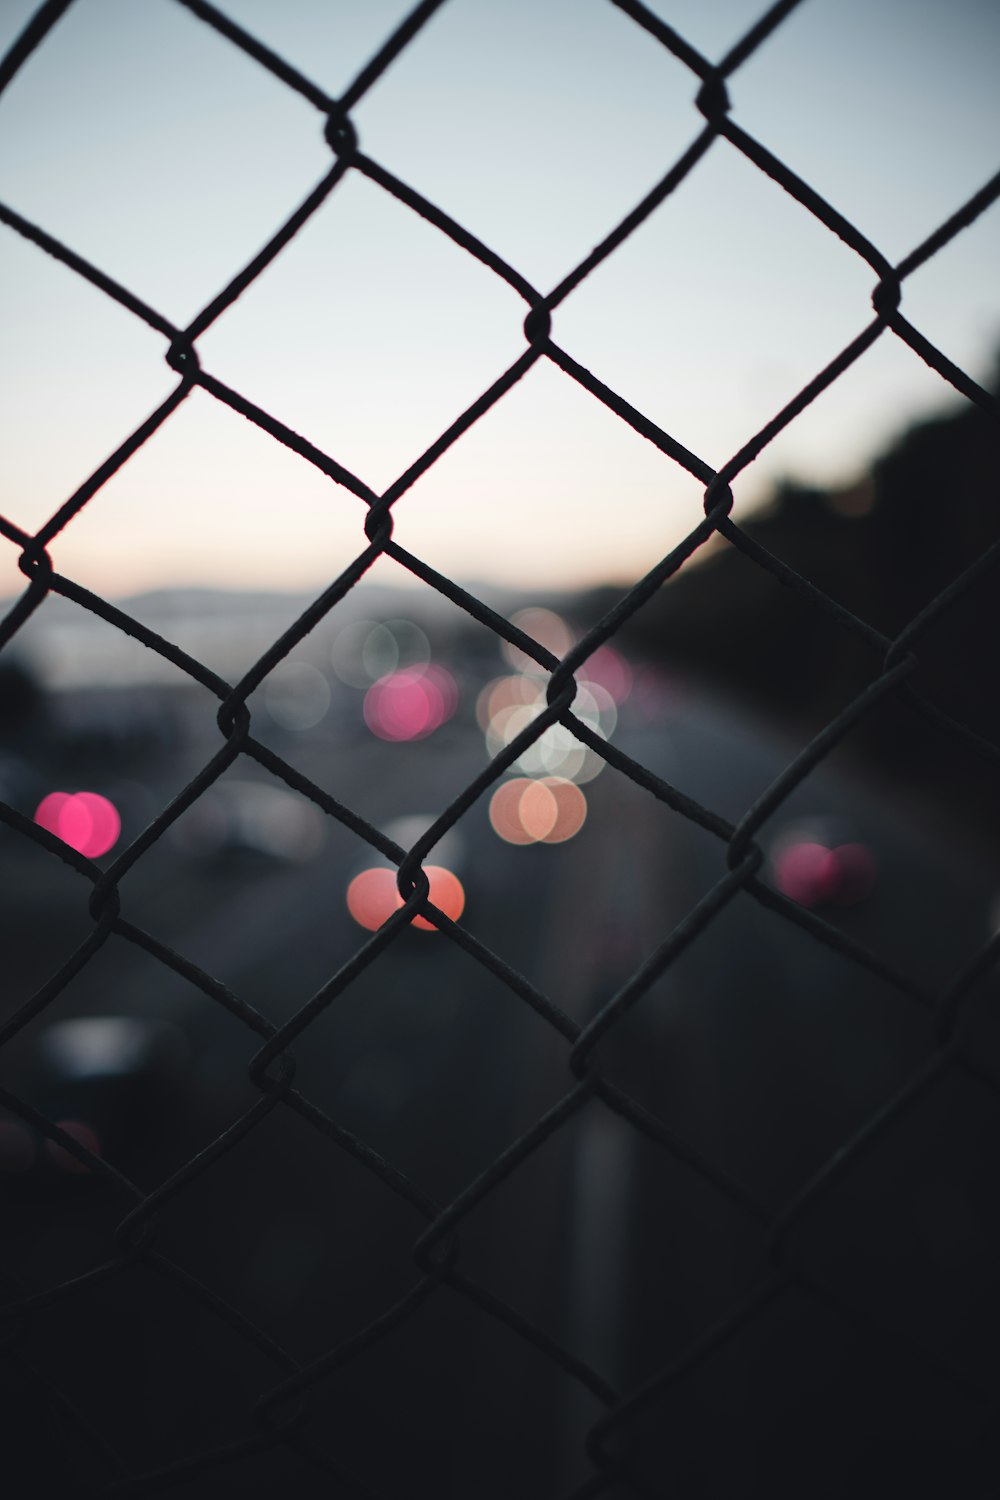 a chain link fence with a view of a city